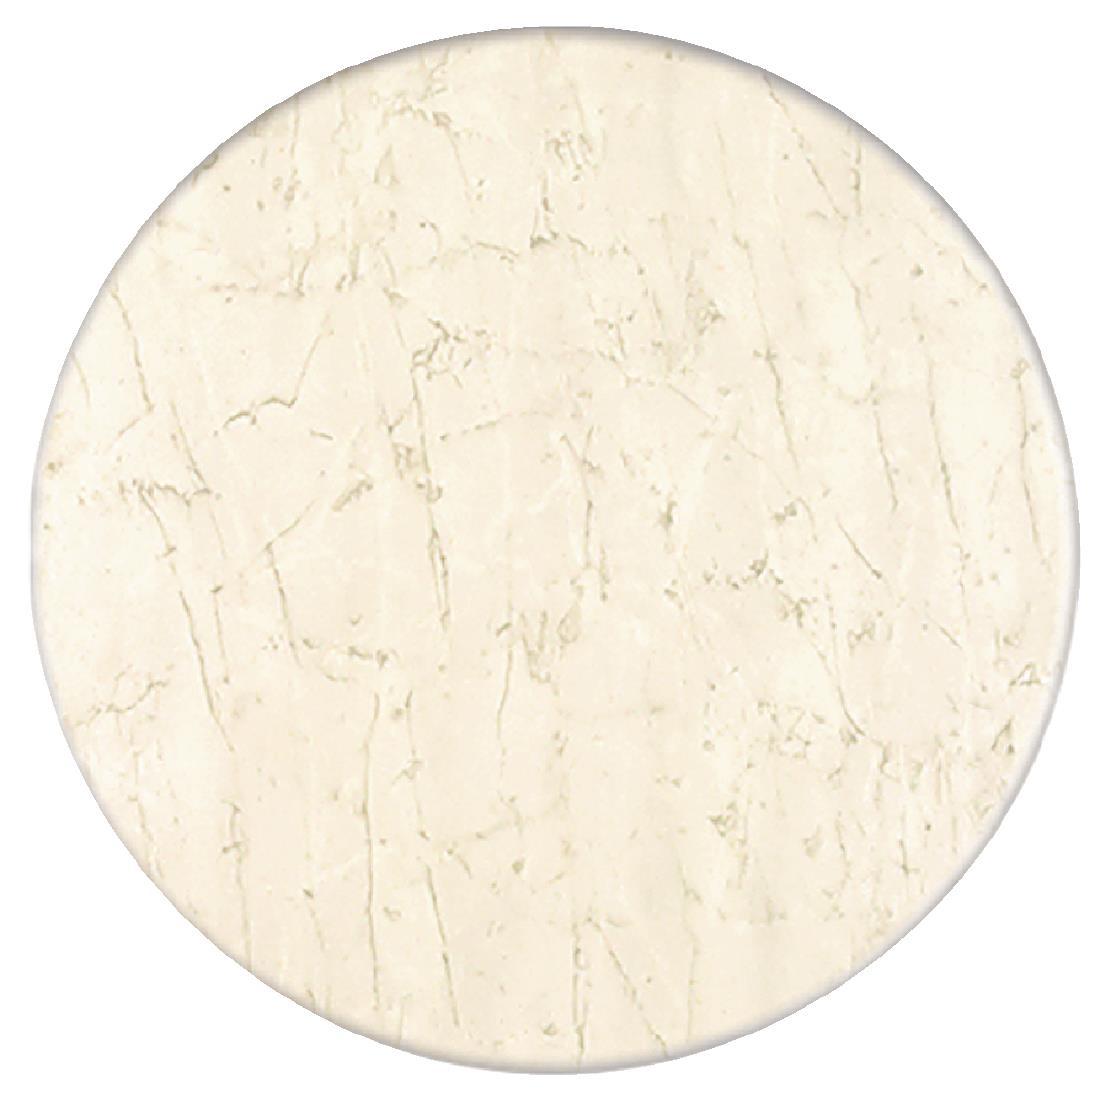 Werzalit Pre-drilled Round Table Top  Marble Bianco 600mm - CG786  - 1